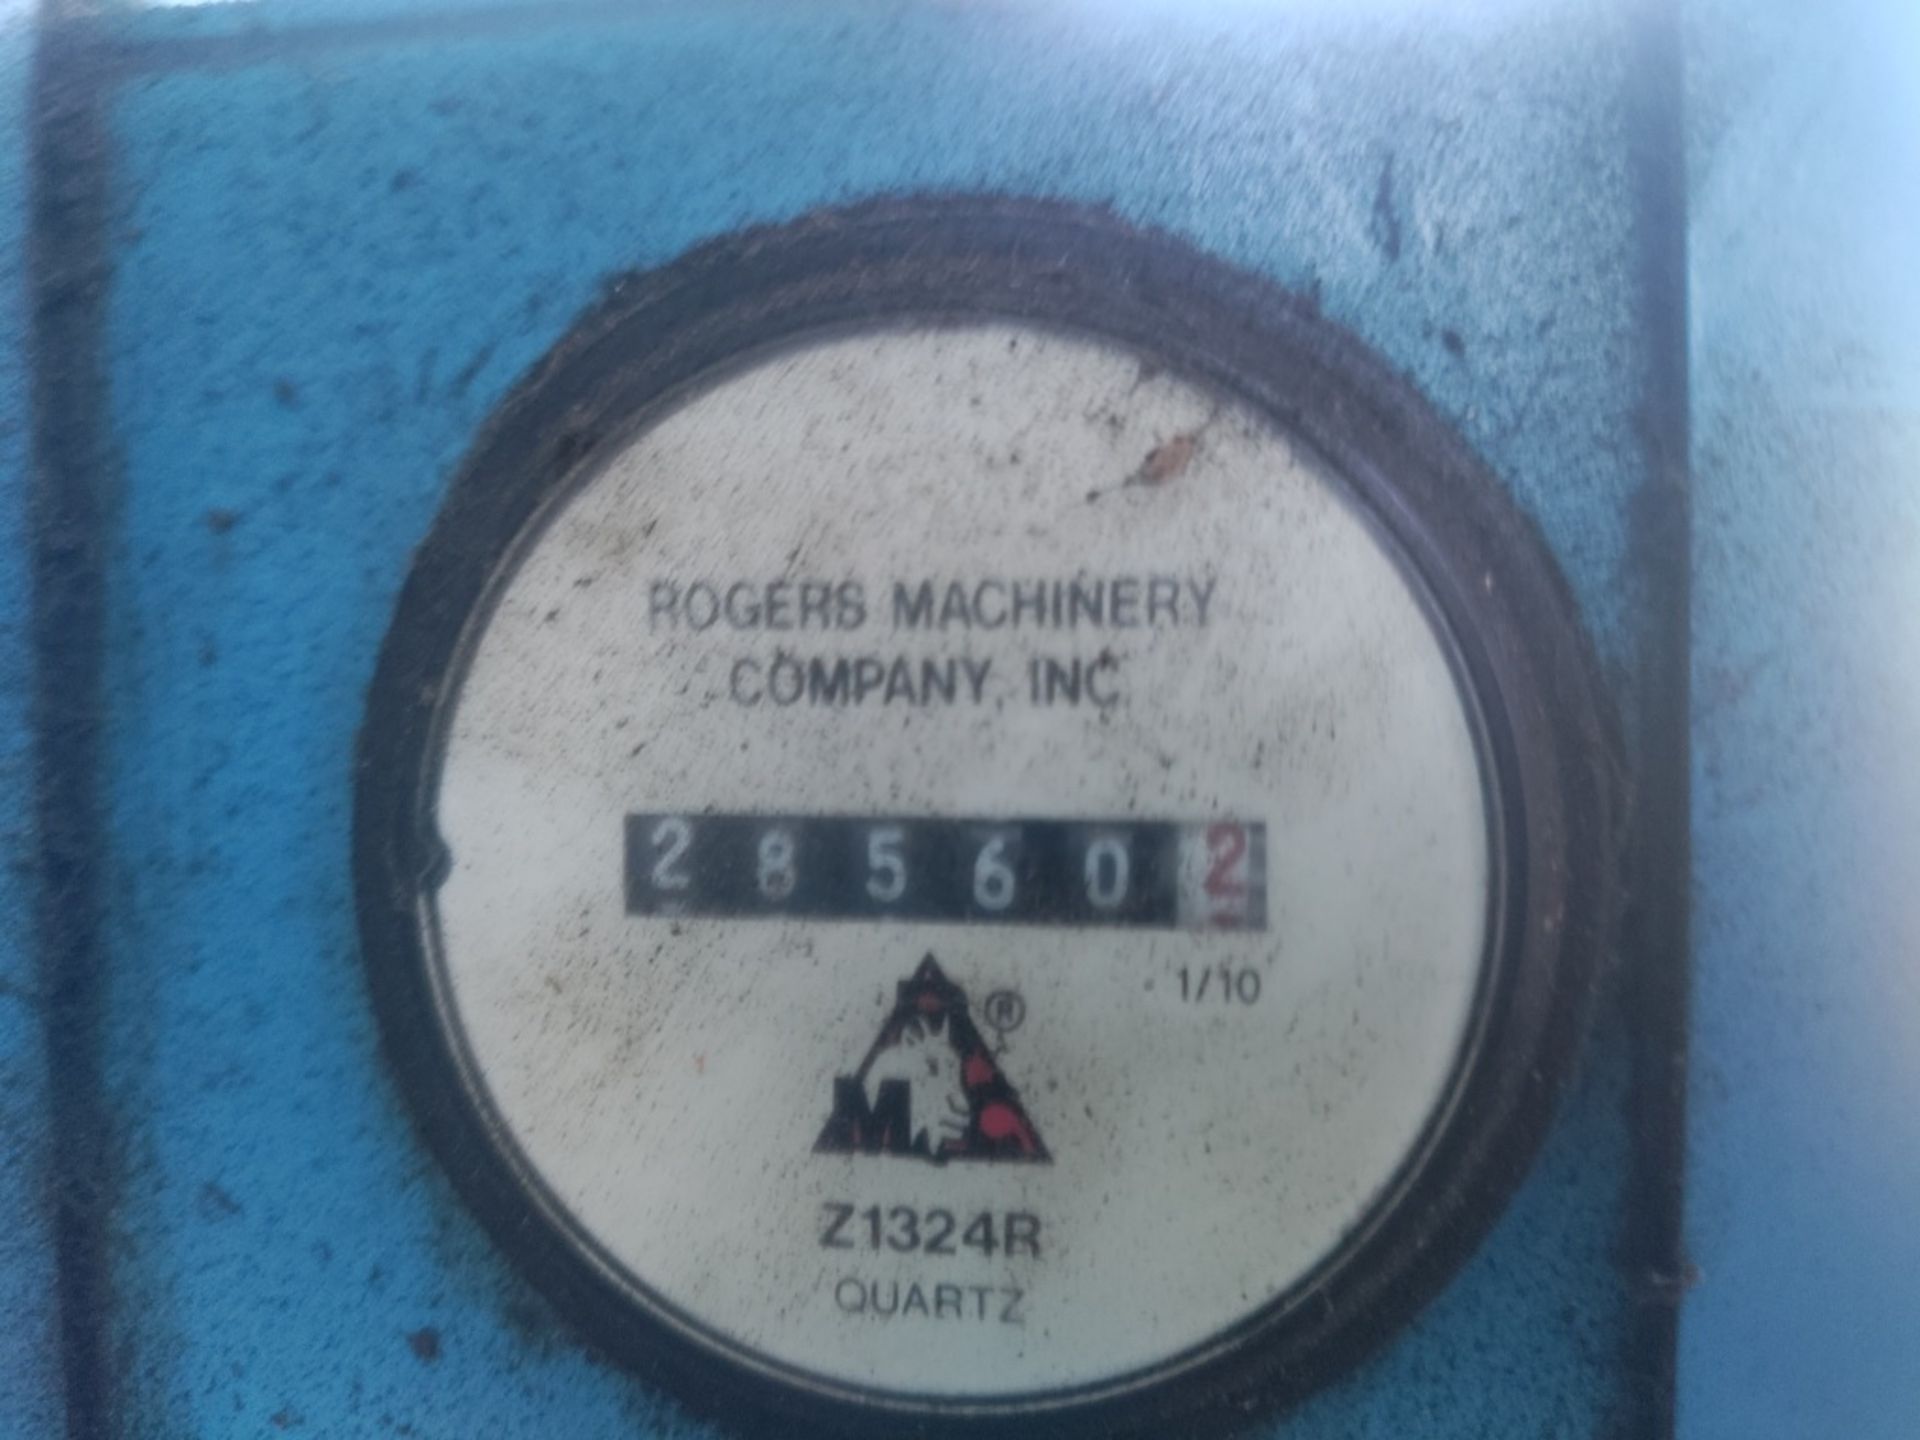 2001 Rogers MG Series Rotary Screw Air Compressor - Image 7 of 11